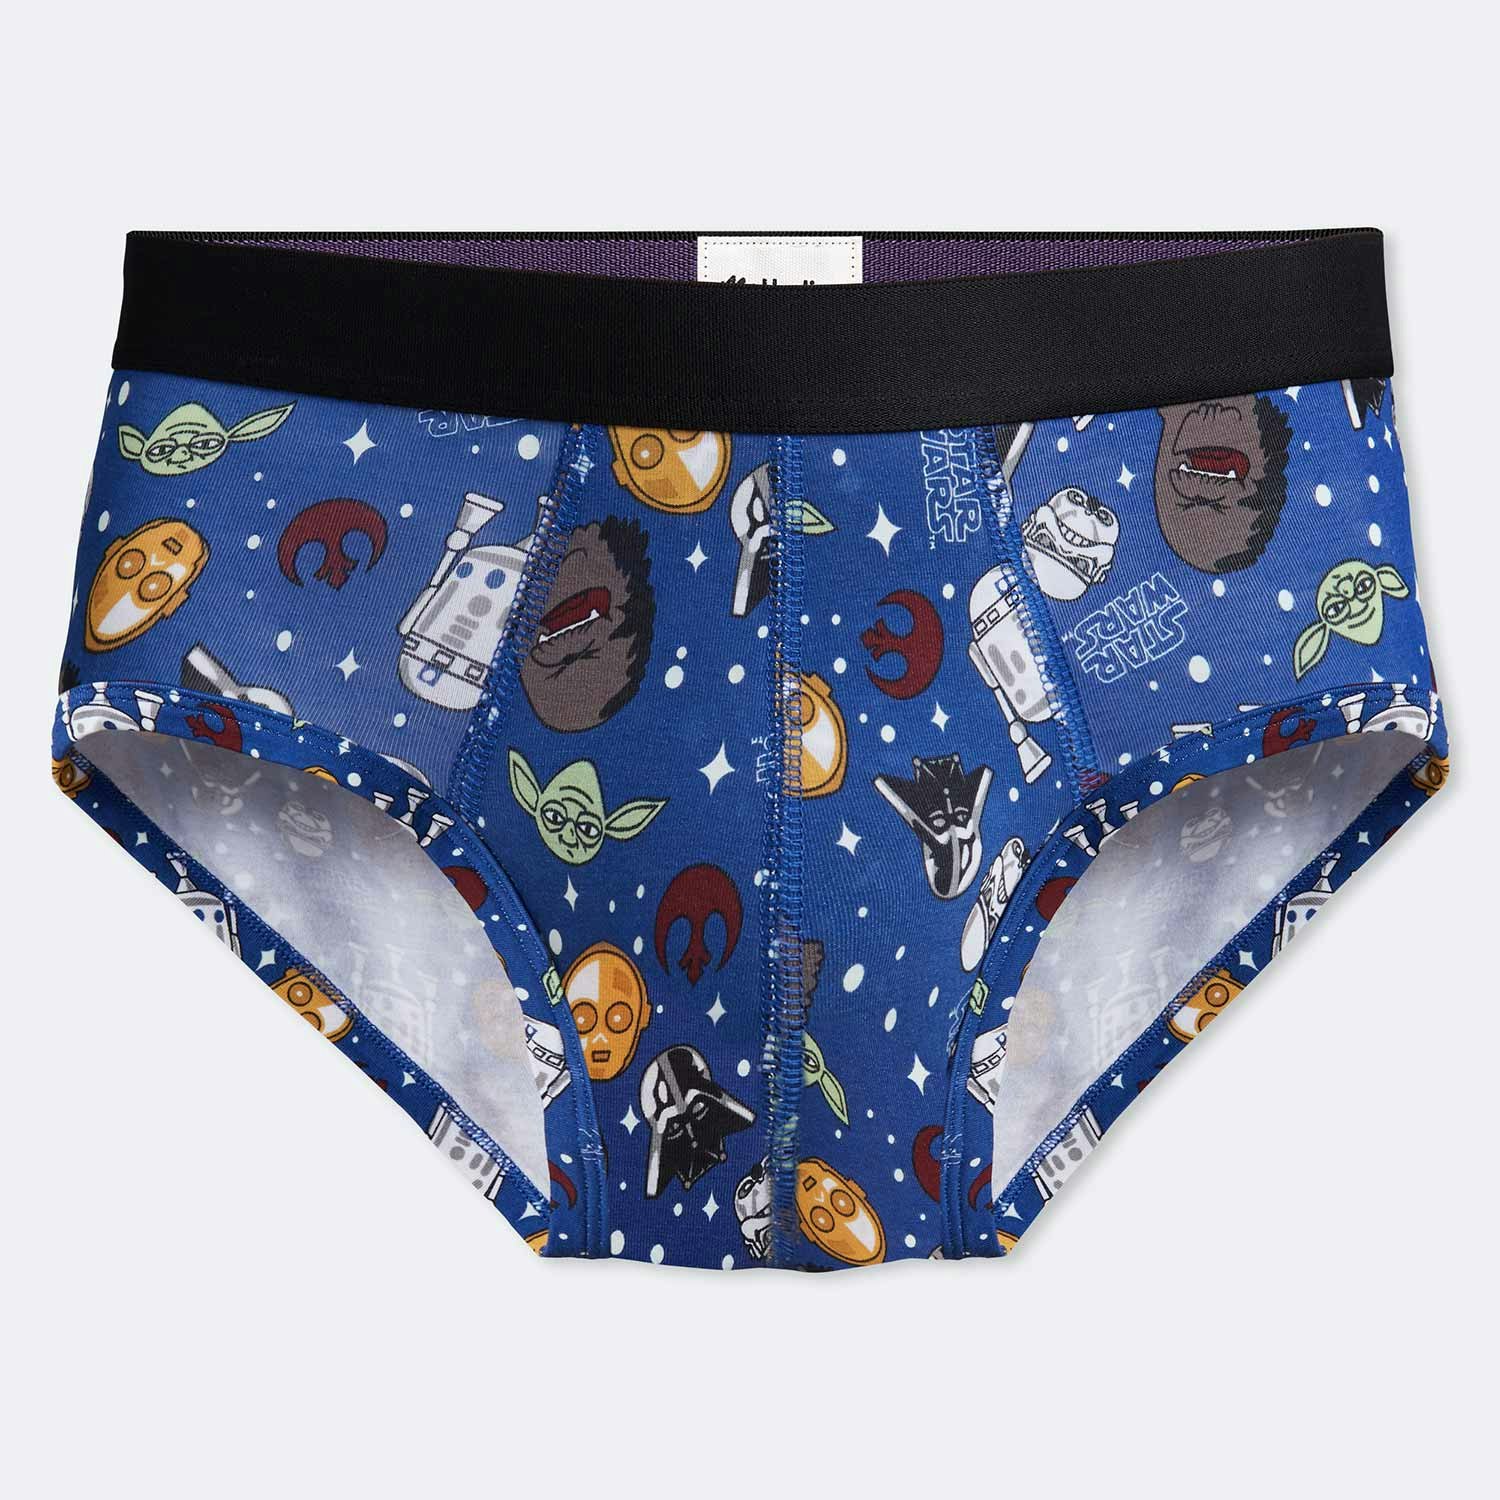 Where To Buy Glow-In-The-Dark 'Star Wars' MeUndies Because They're